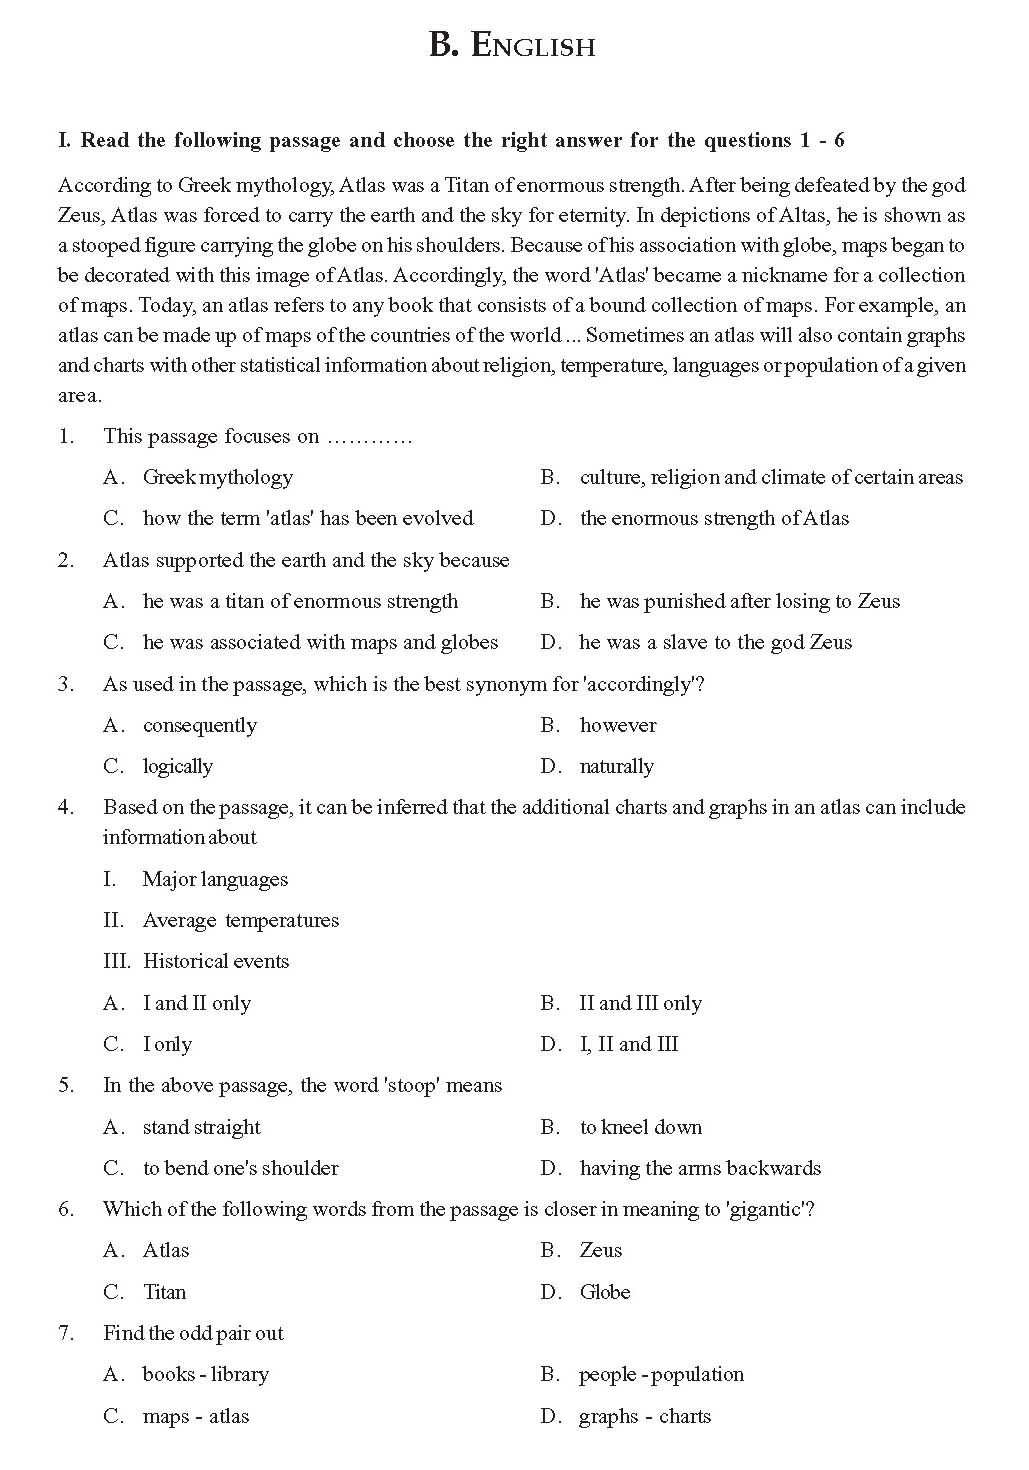 KTET Category II Paper II Question Paper with Answers 2012 10